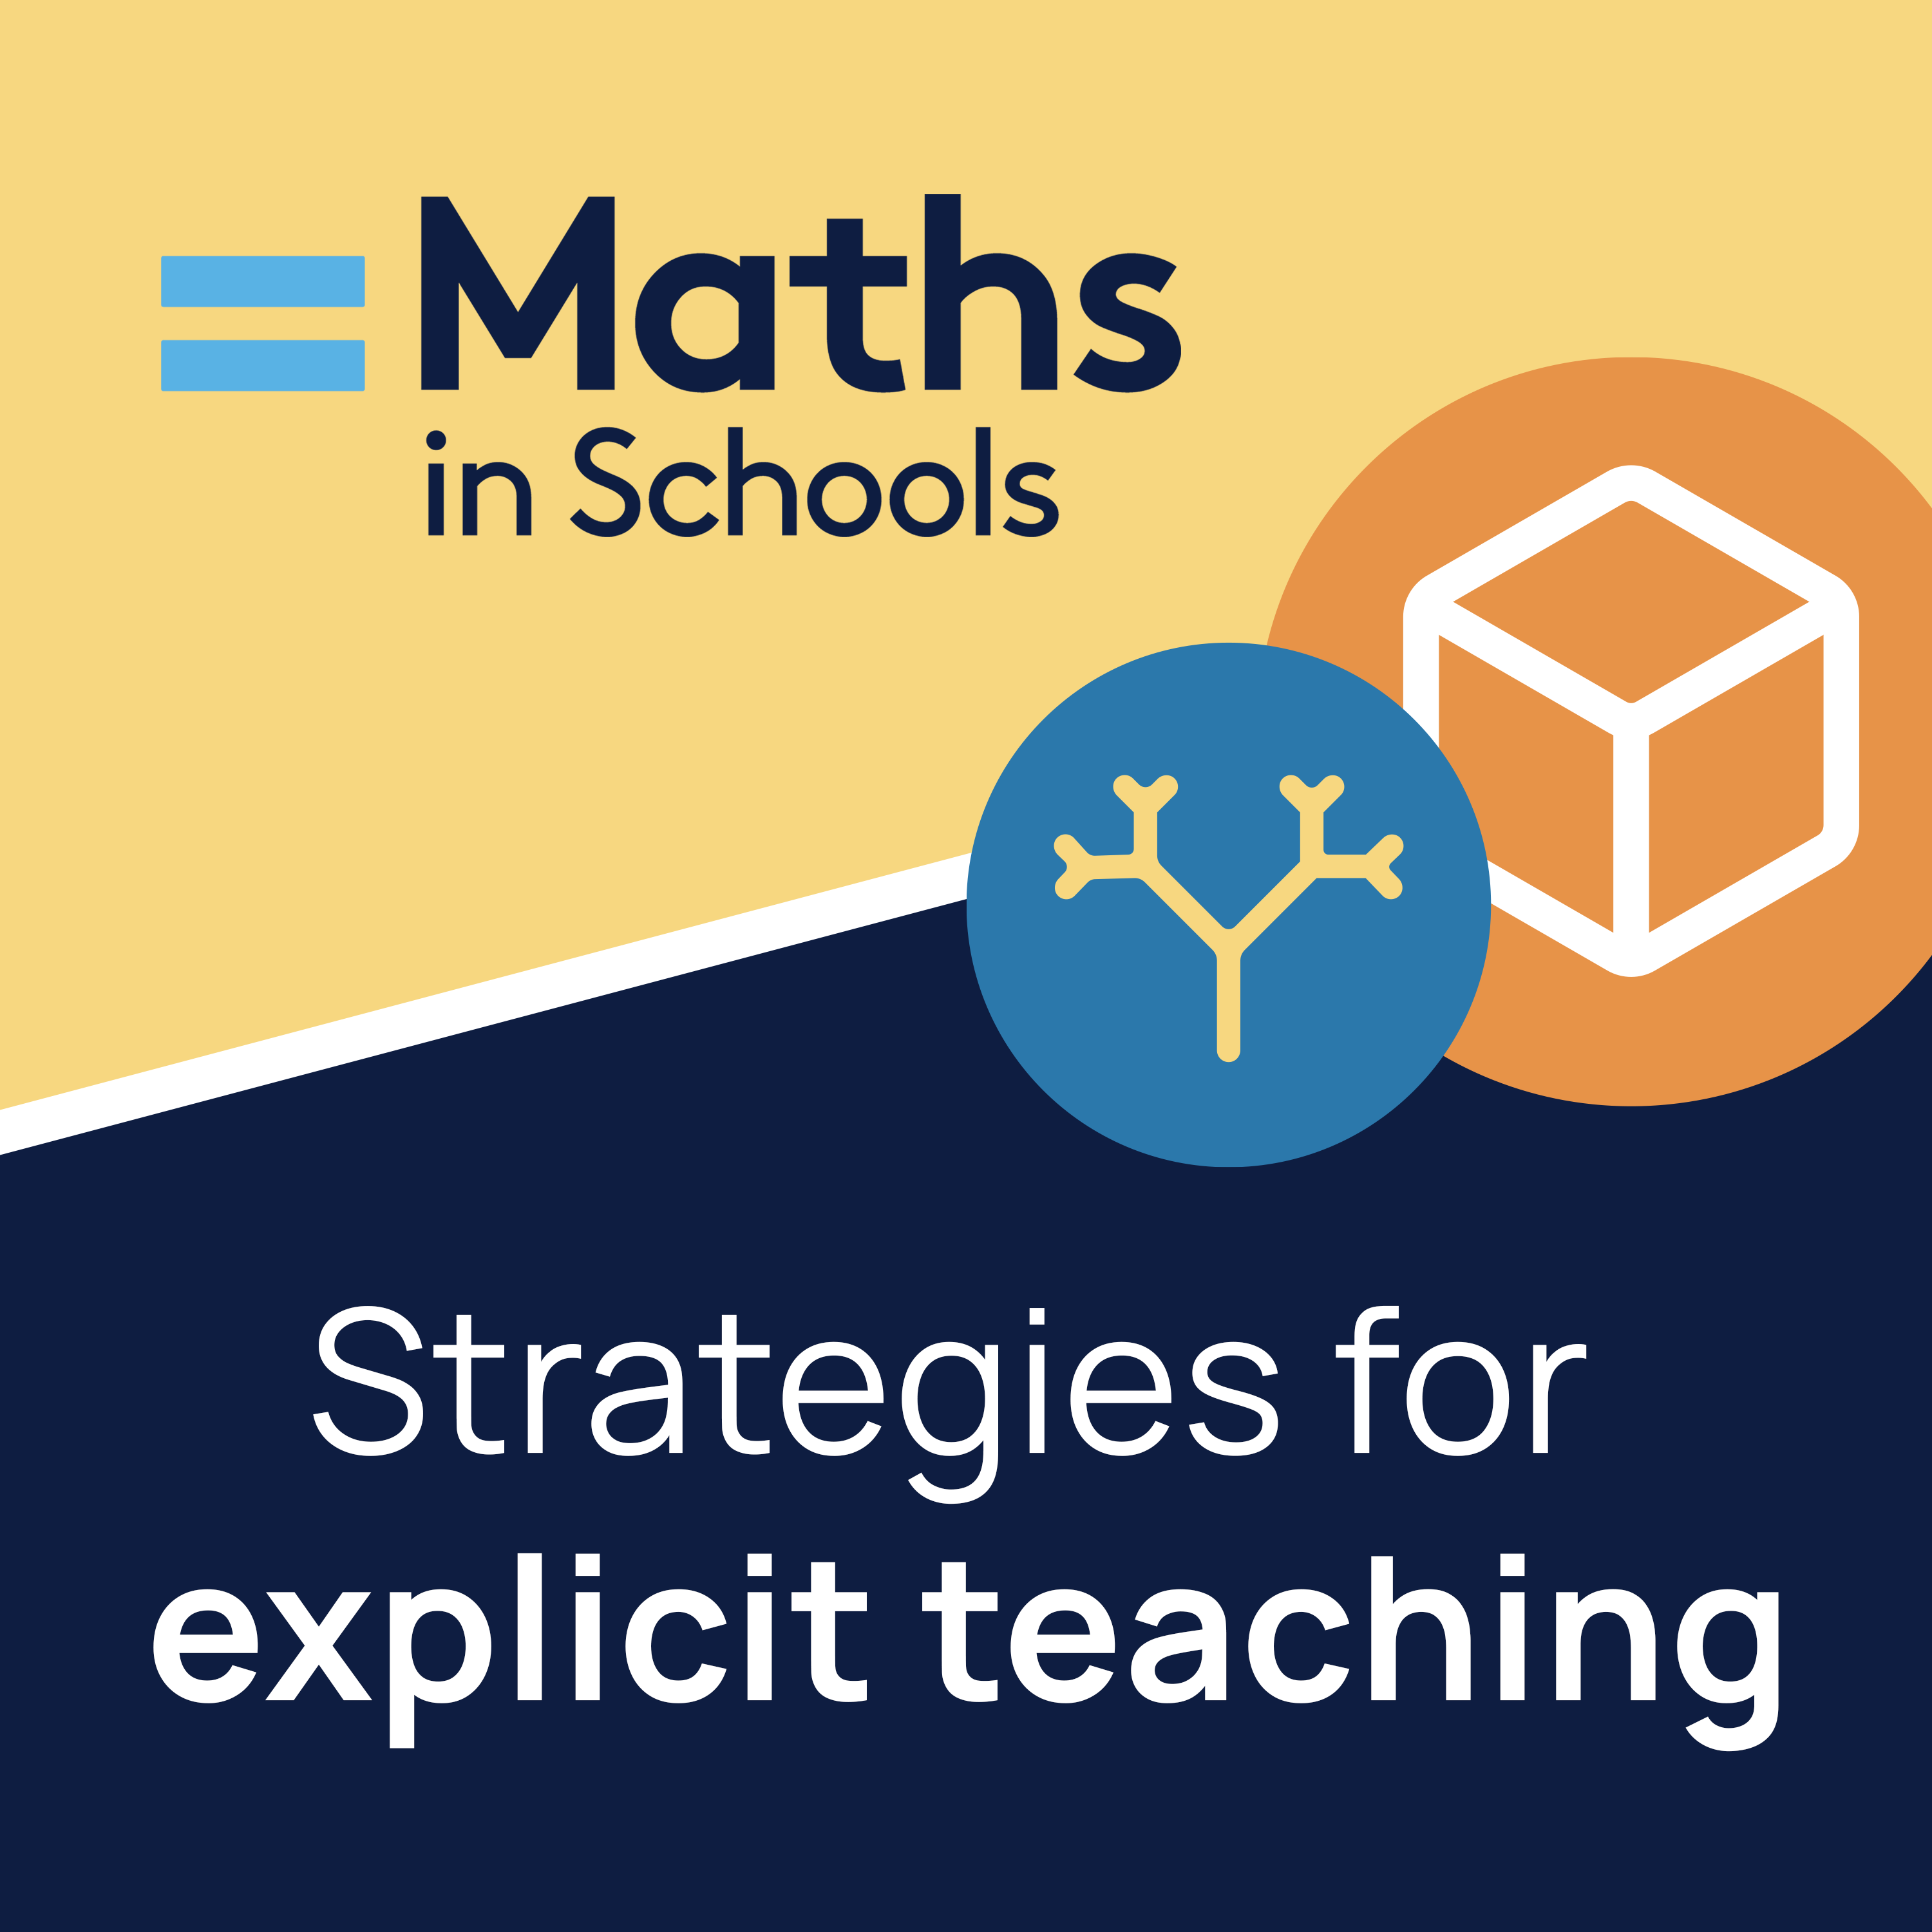 Classroom dialogue focused on making mathematical ideas explicit